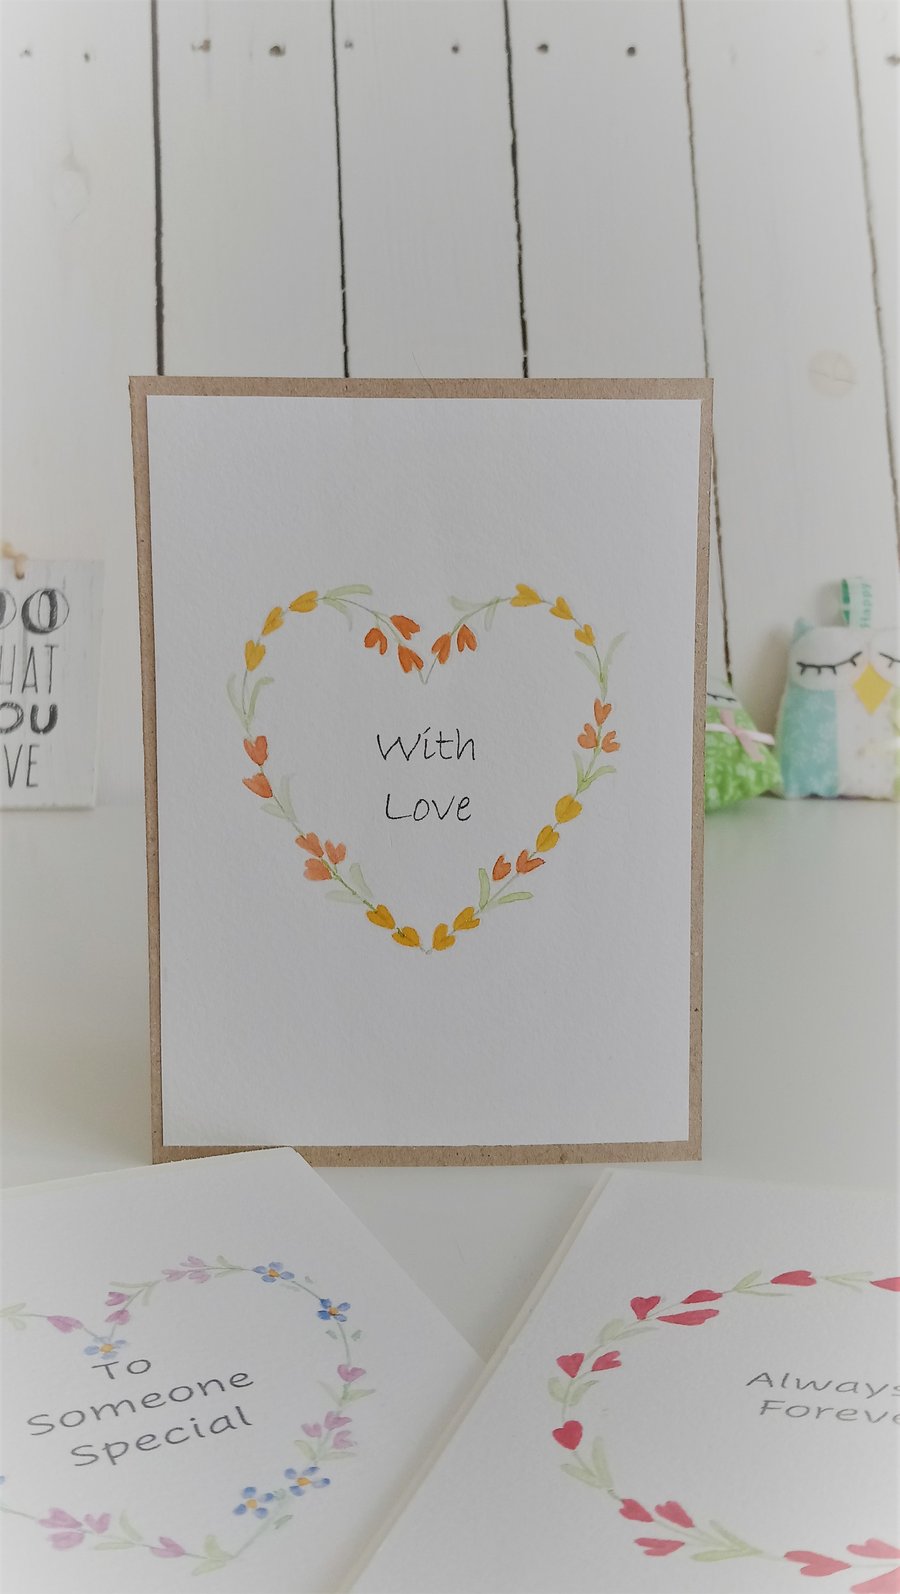 Original Hand Painted "With Love" Card with Orange & Yellow Flower Wreath